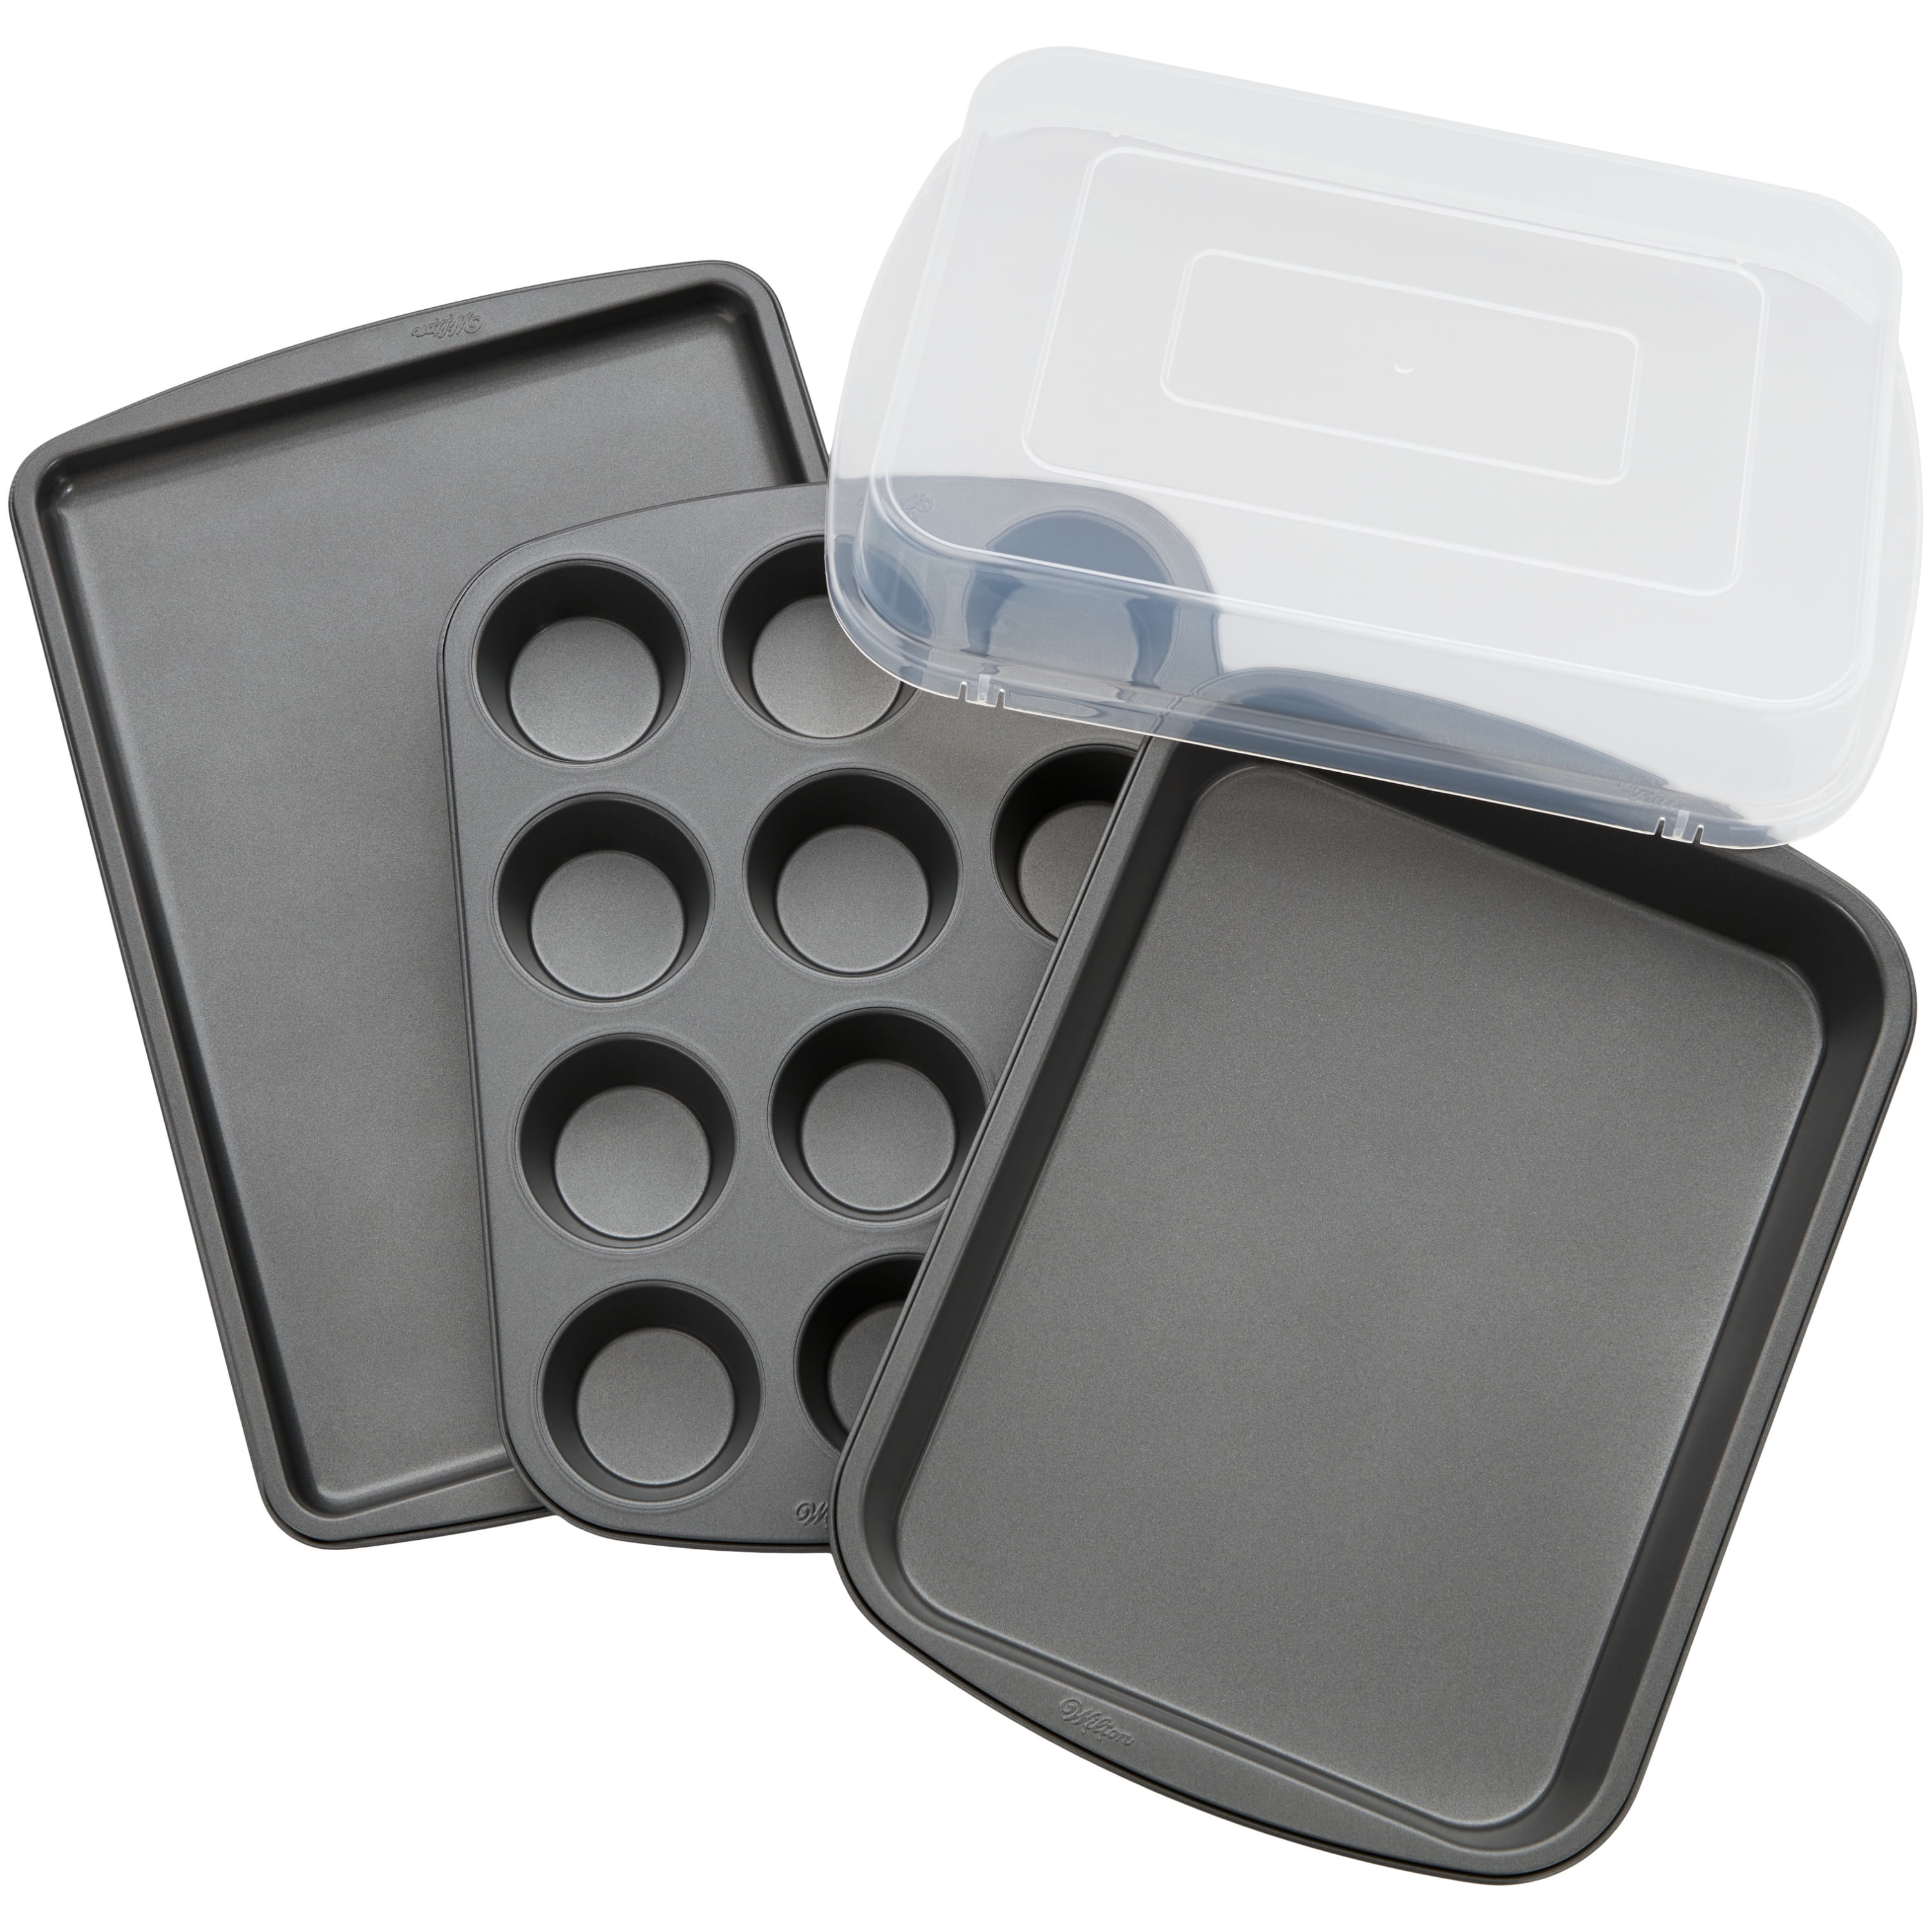 Perfect Results Muffin, Baking and Oblong Pan Bakeware Set, 3